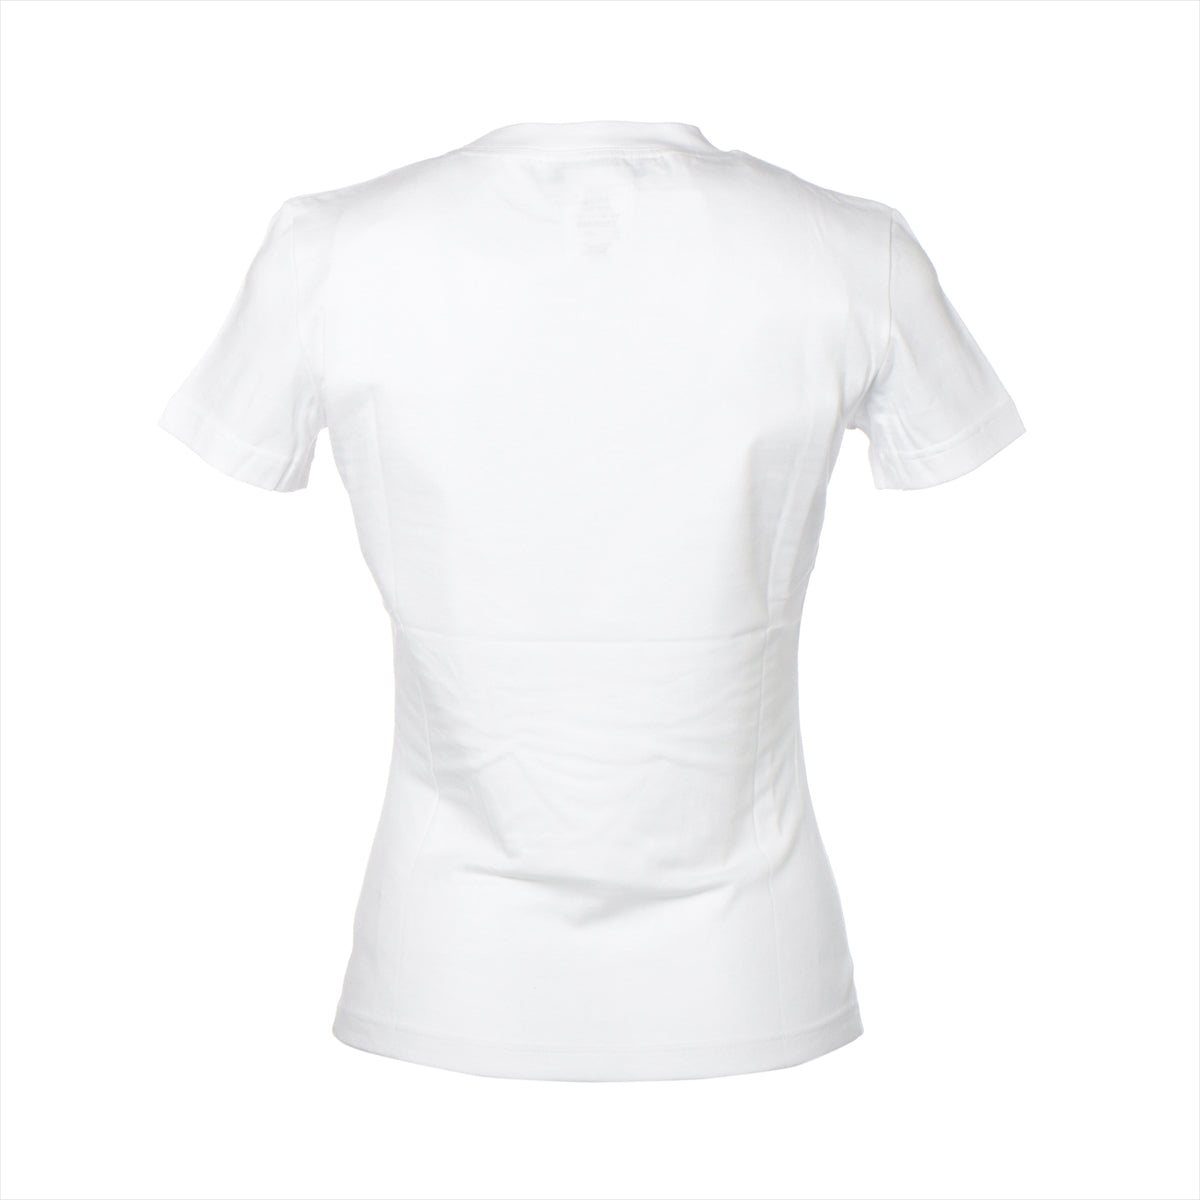 Christian Dior 02 Cotton T-shirt F38 Ladies' White  J'ADORE 2A12155028 with accessories